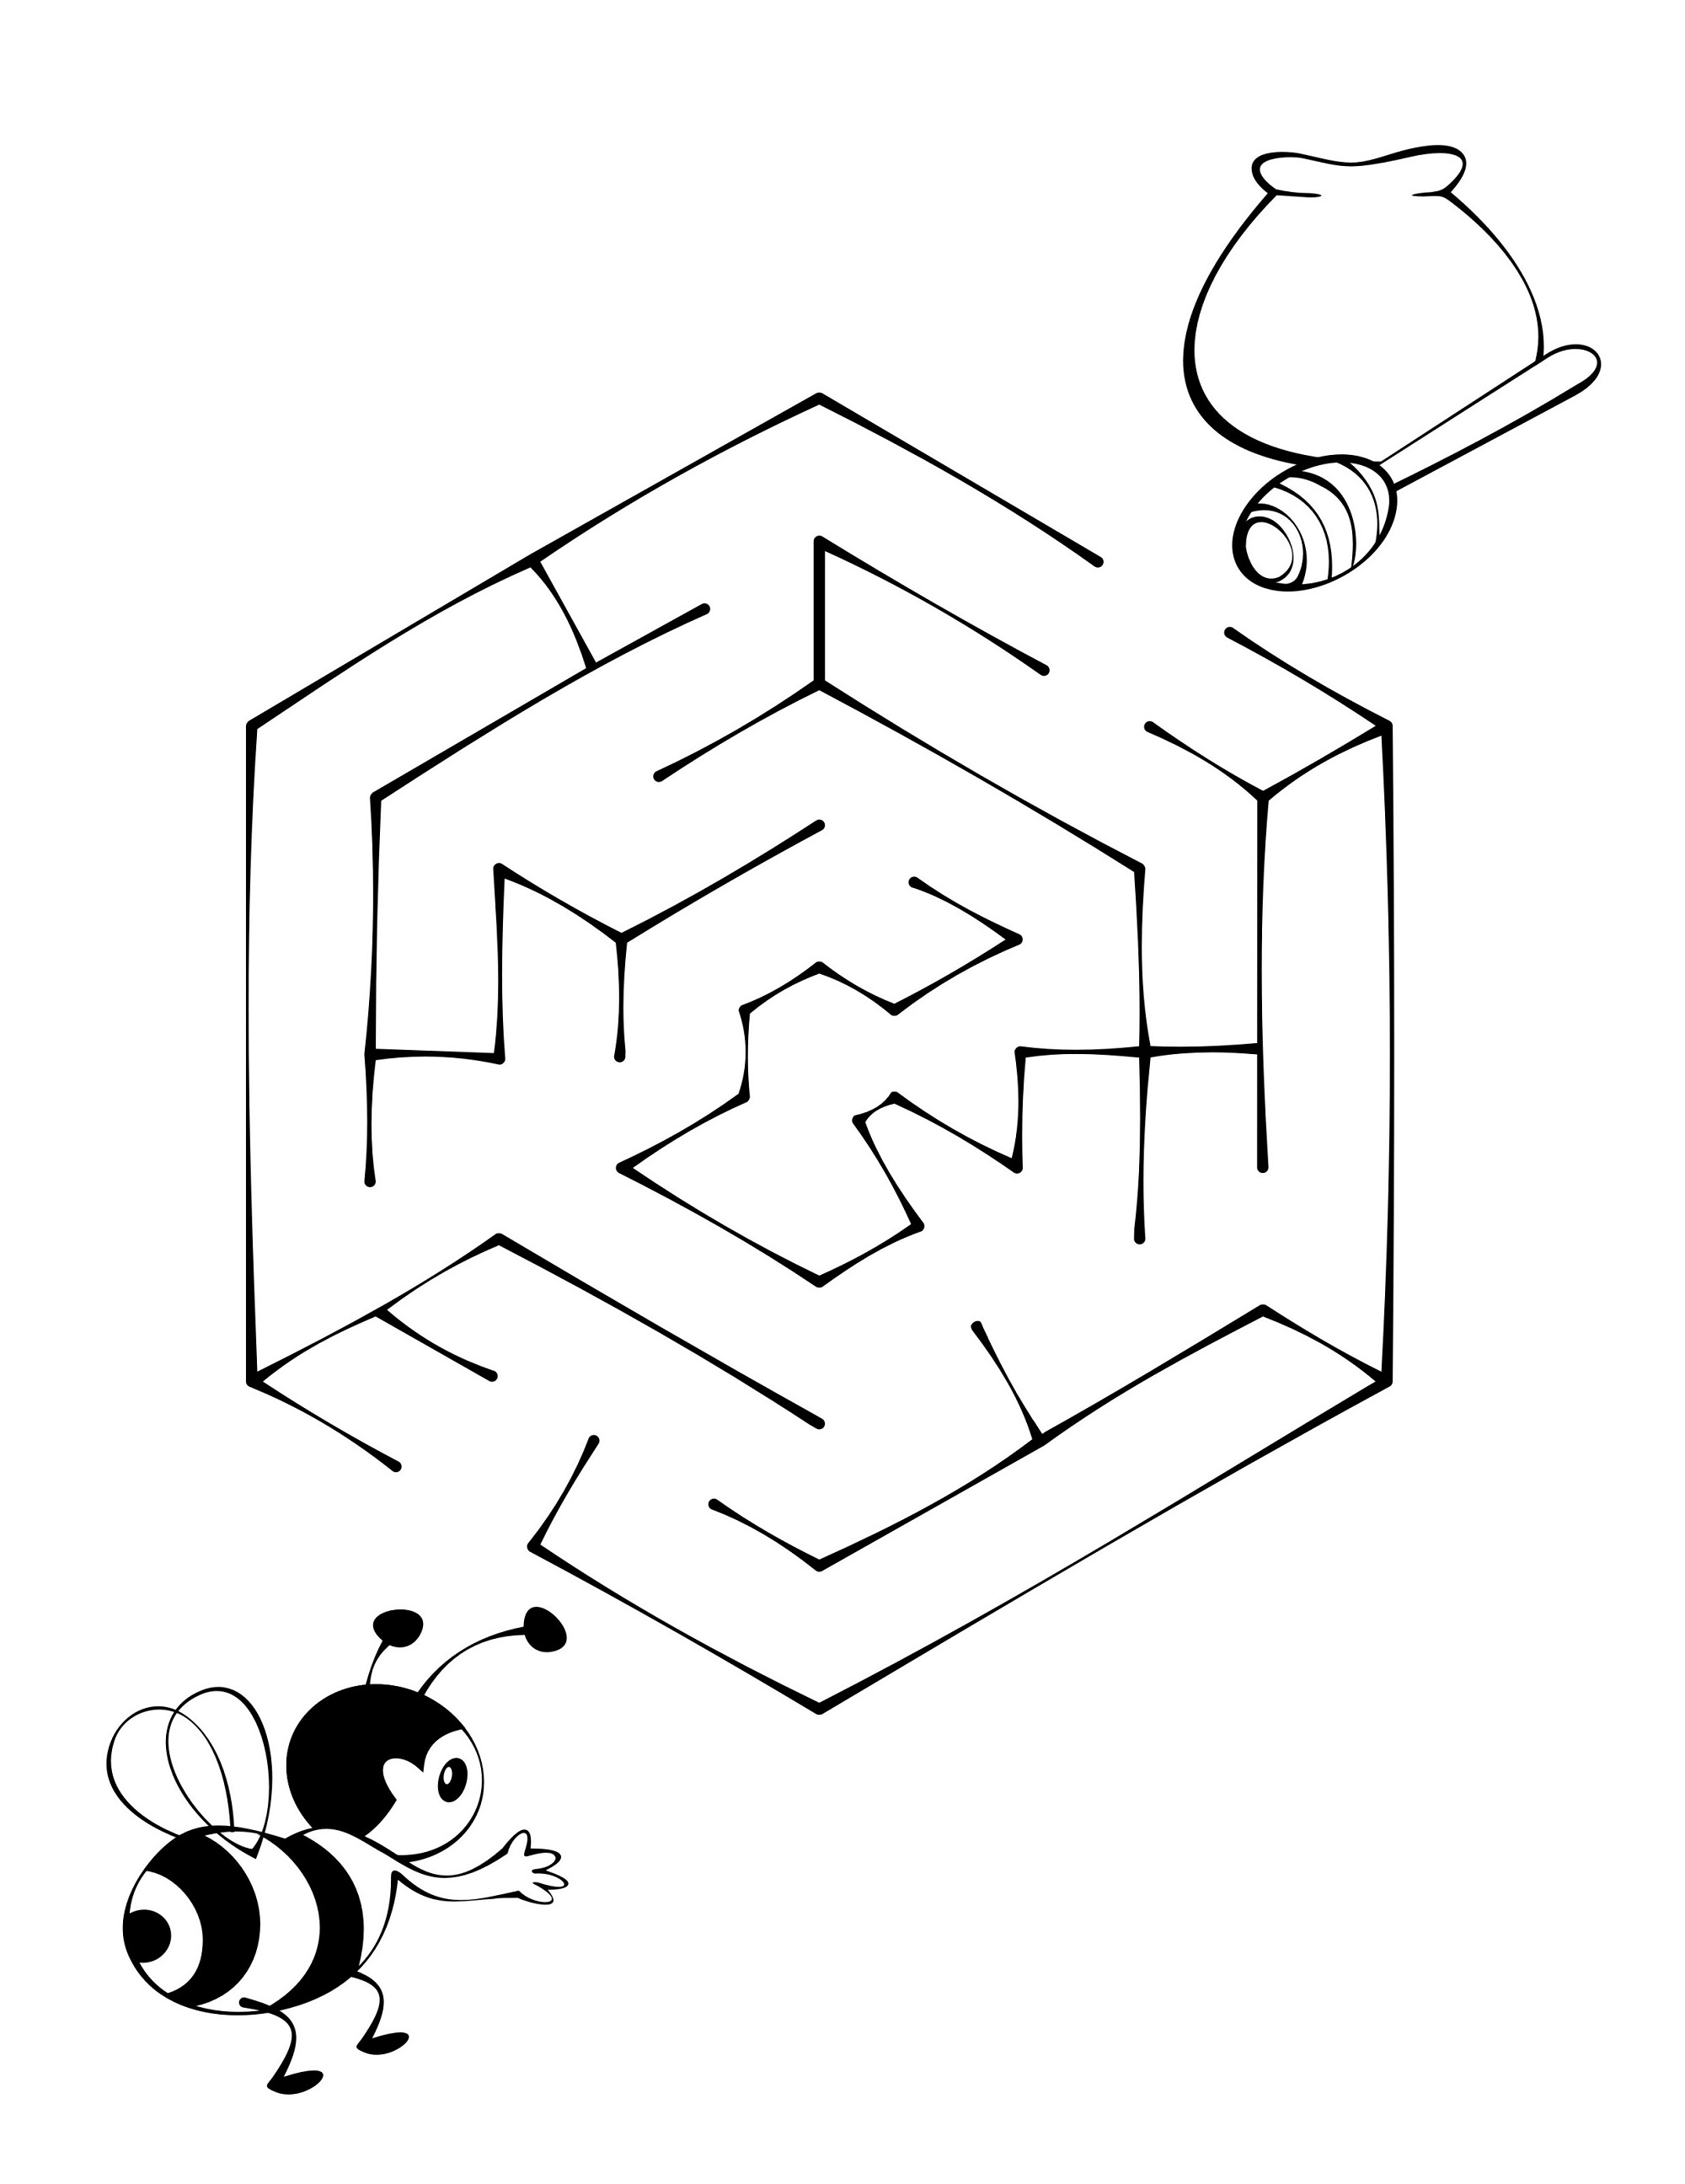 Maze Puzzle For Kids To Print | Kiddo Shelter - Printable Puzzles For Kids